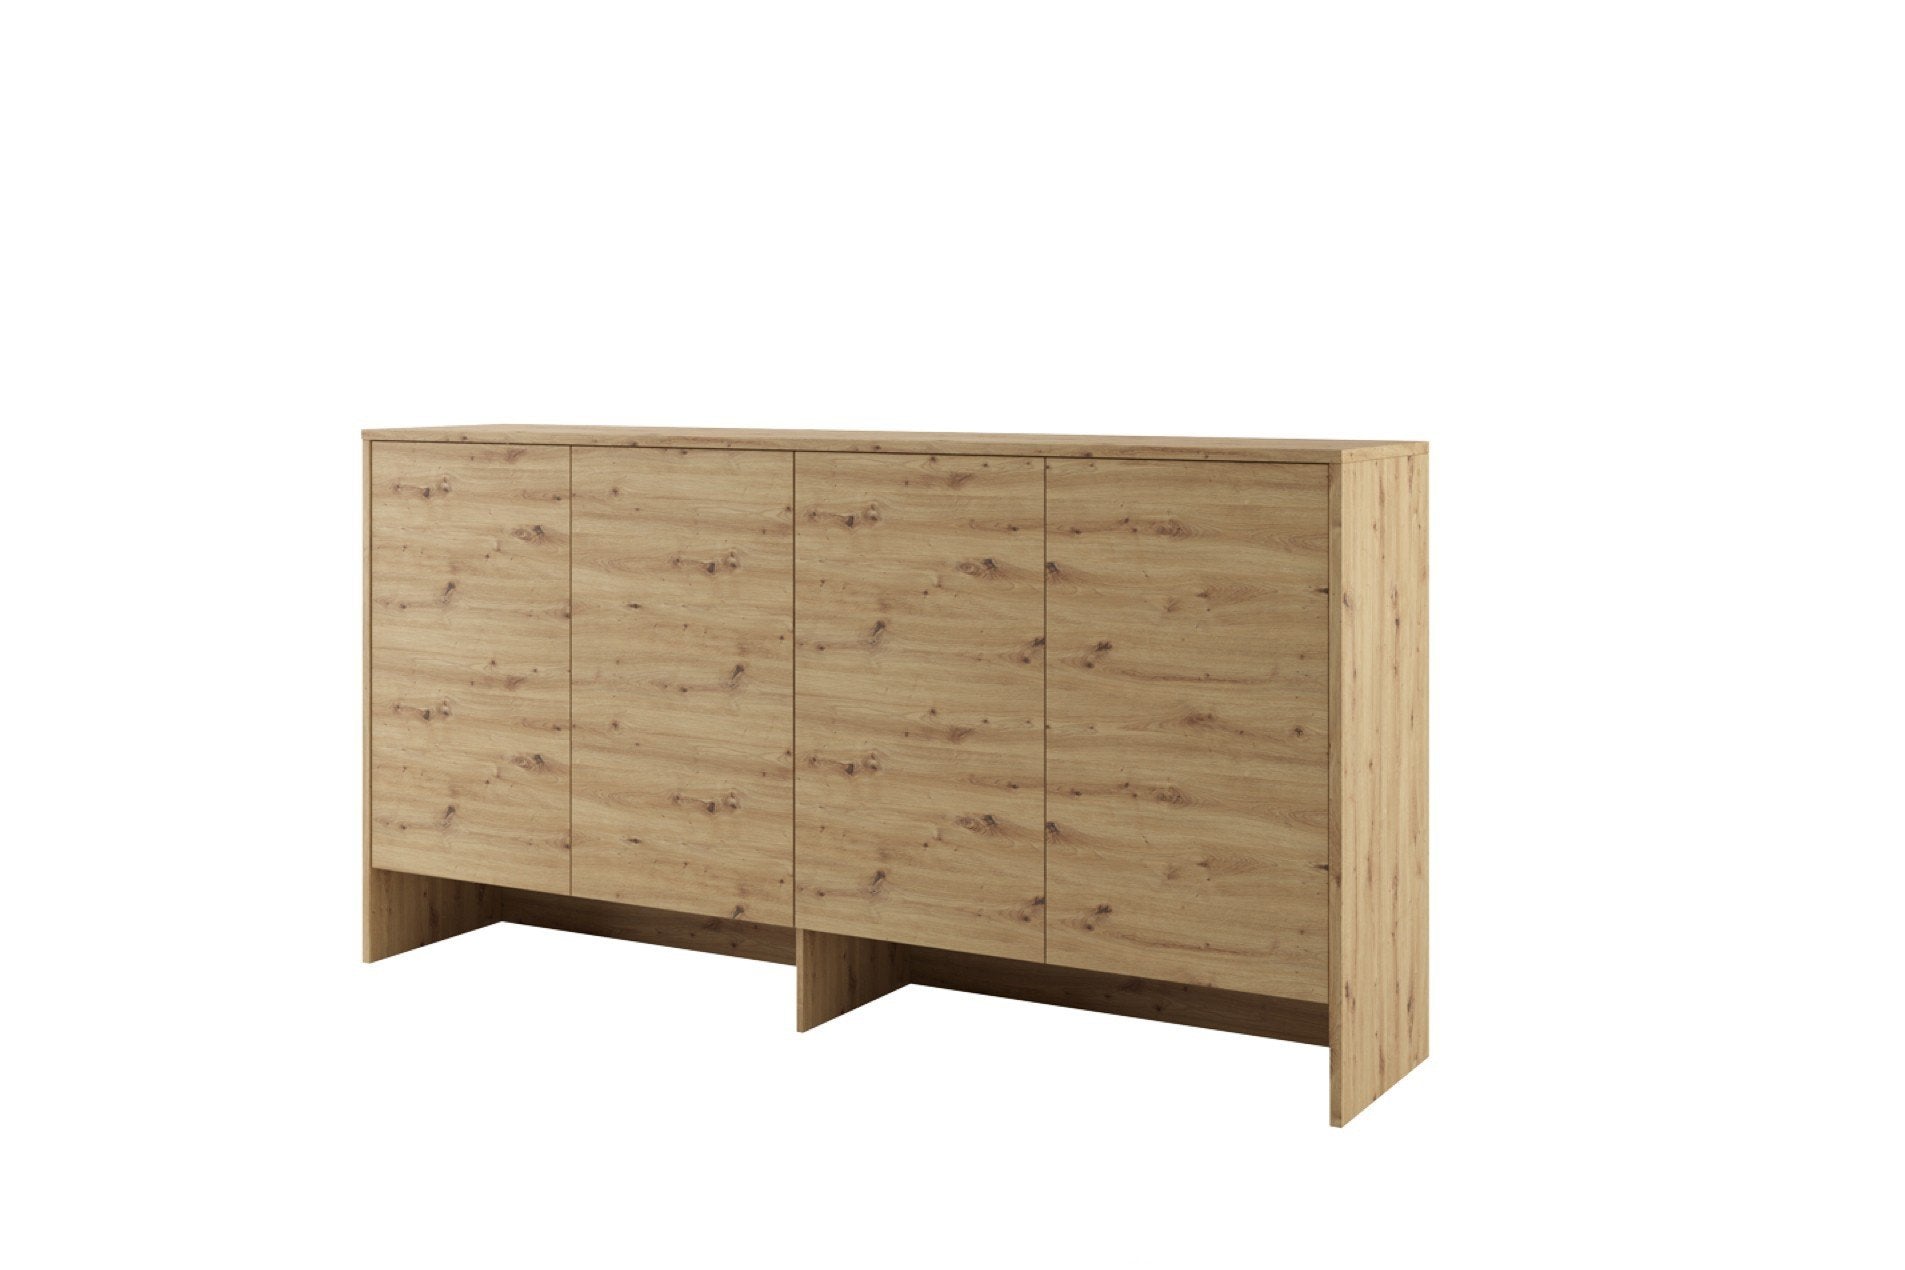 BC-11 Over Bed Unit for Horizontal Wall Bed Concept 90cm Oak Artisan Wall Bed with Storage Unit 